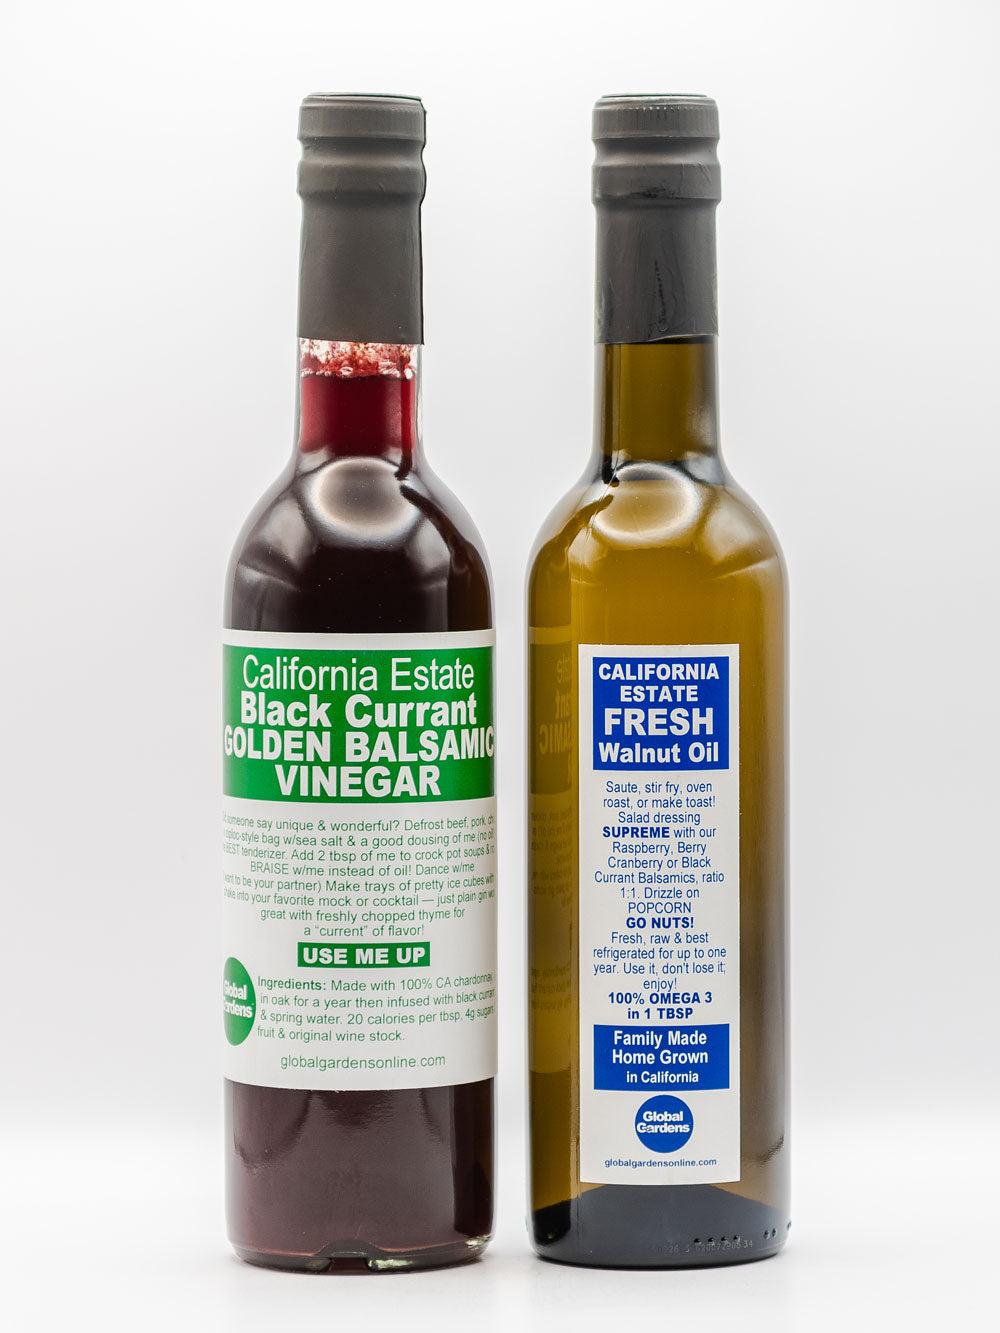 Omega 3 Power Gift Duo - Roasted Walnut Oil & Berry Cranberry OR Black Currant Balsamic